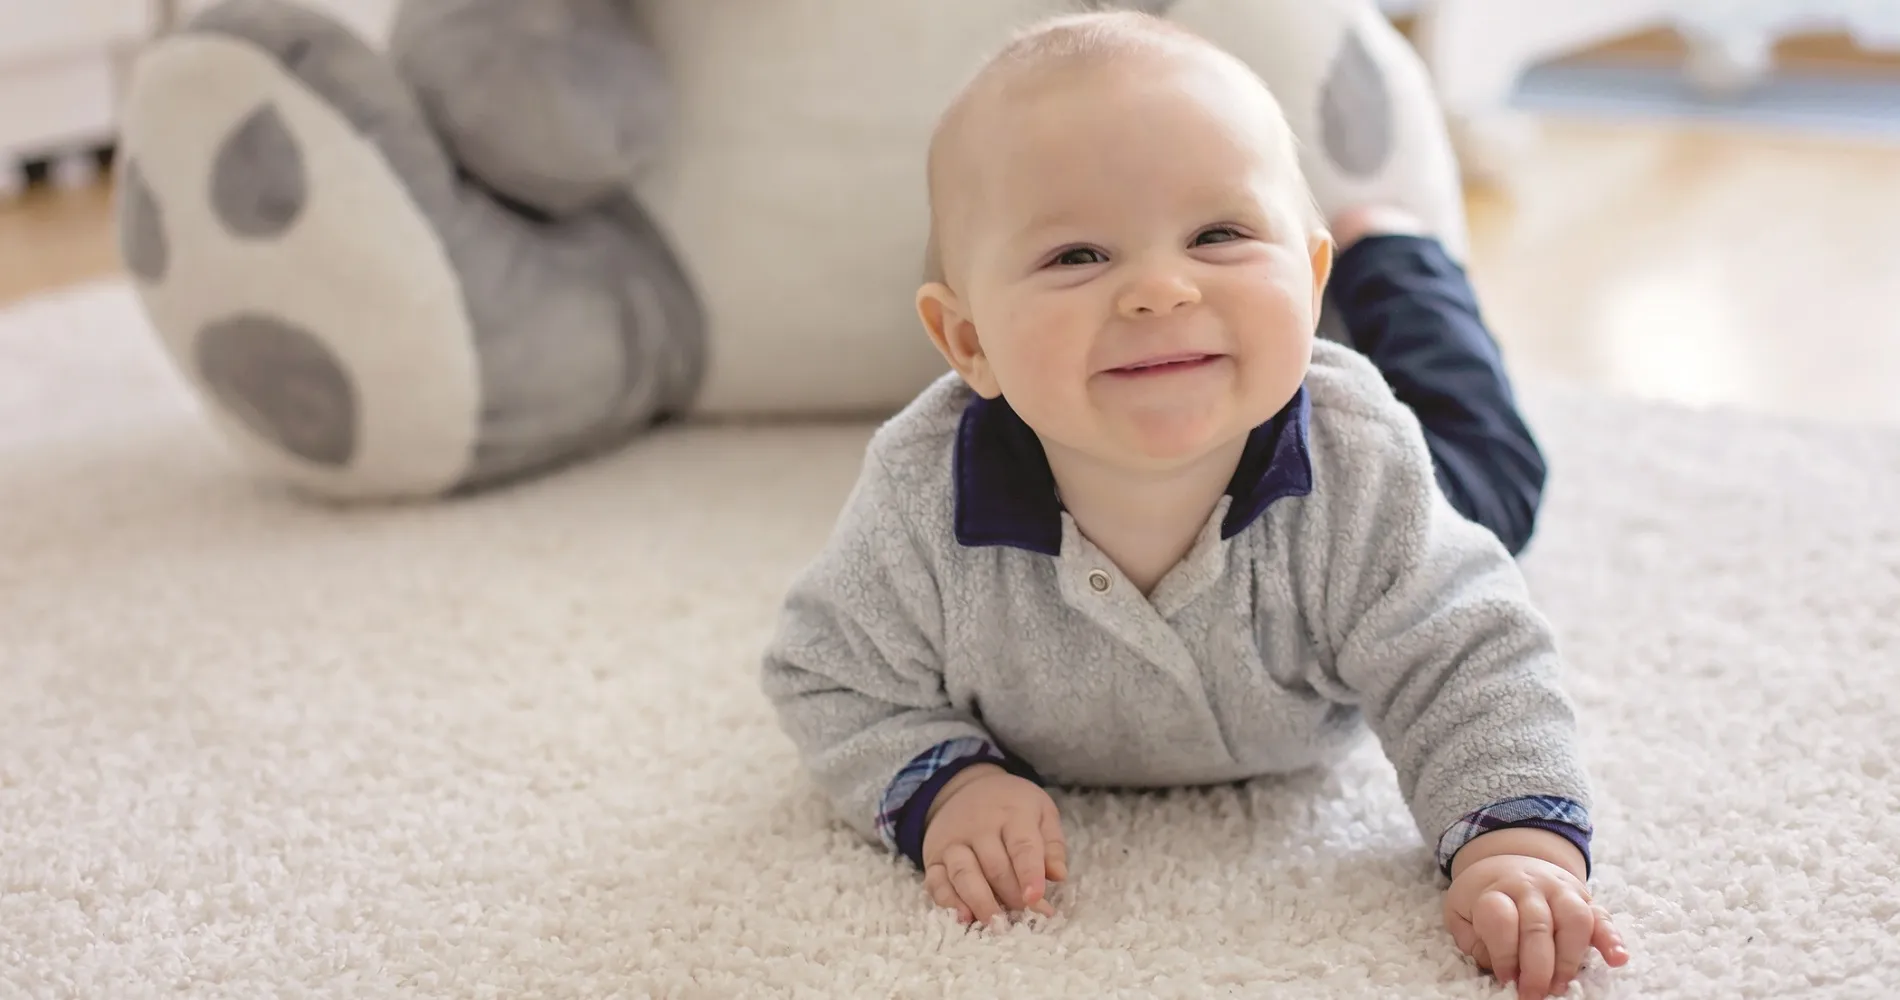 Baby smiling while laying on the white fluffy carpeted floor